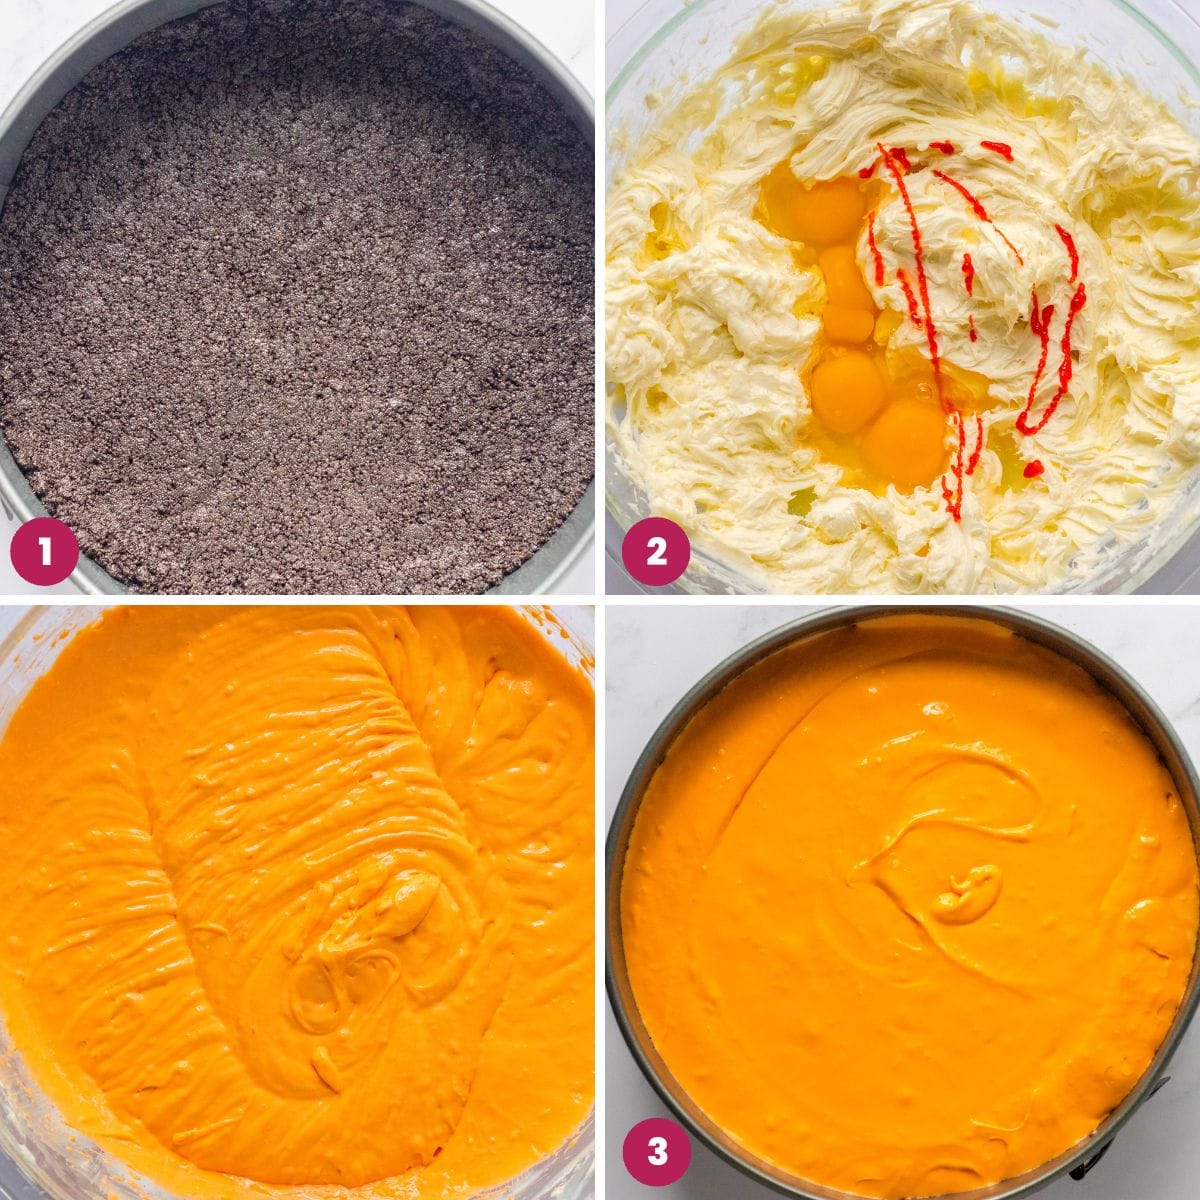 Collage of four images showing how to make orange colored cheesecake batter